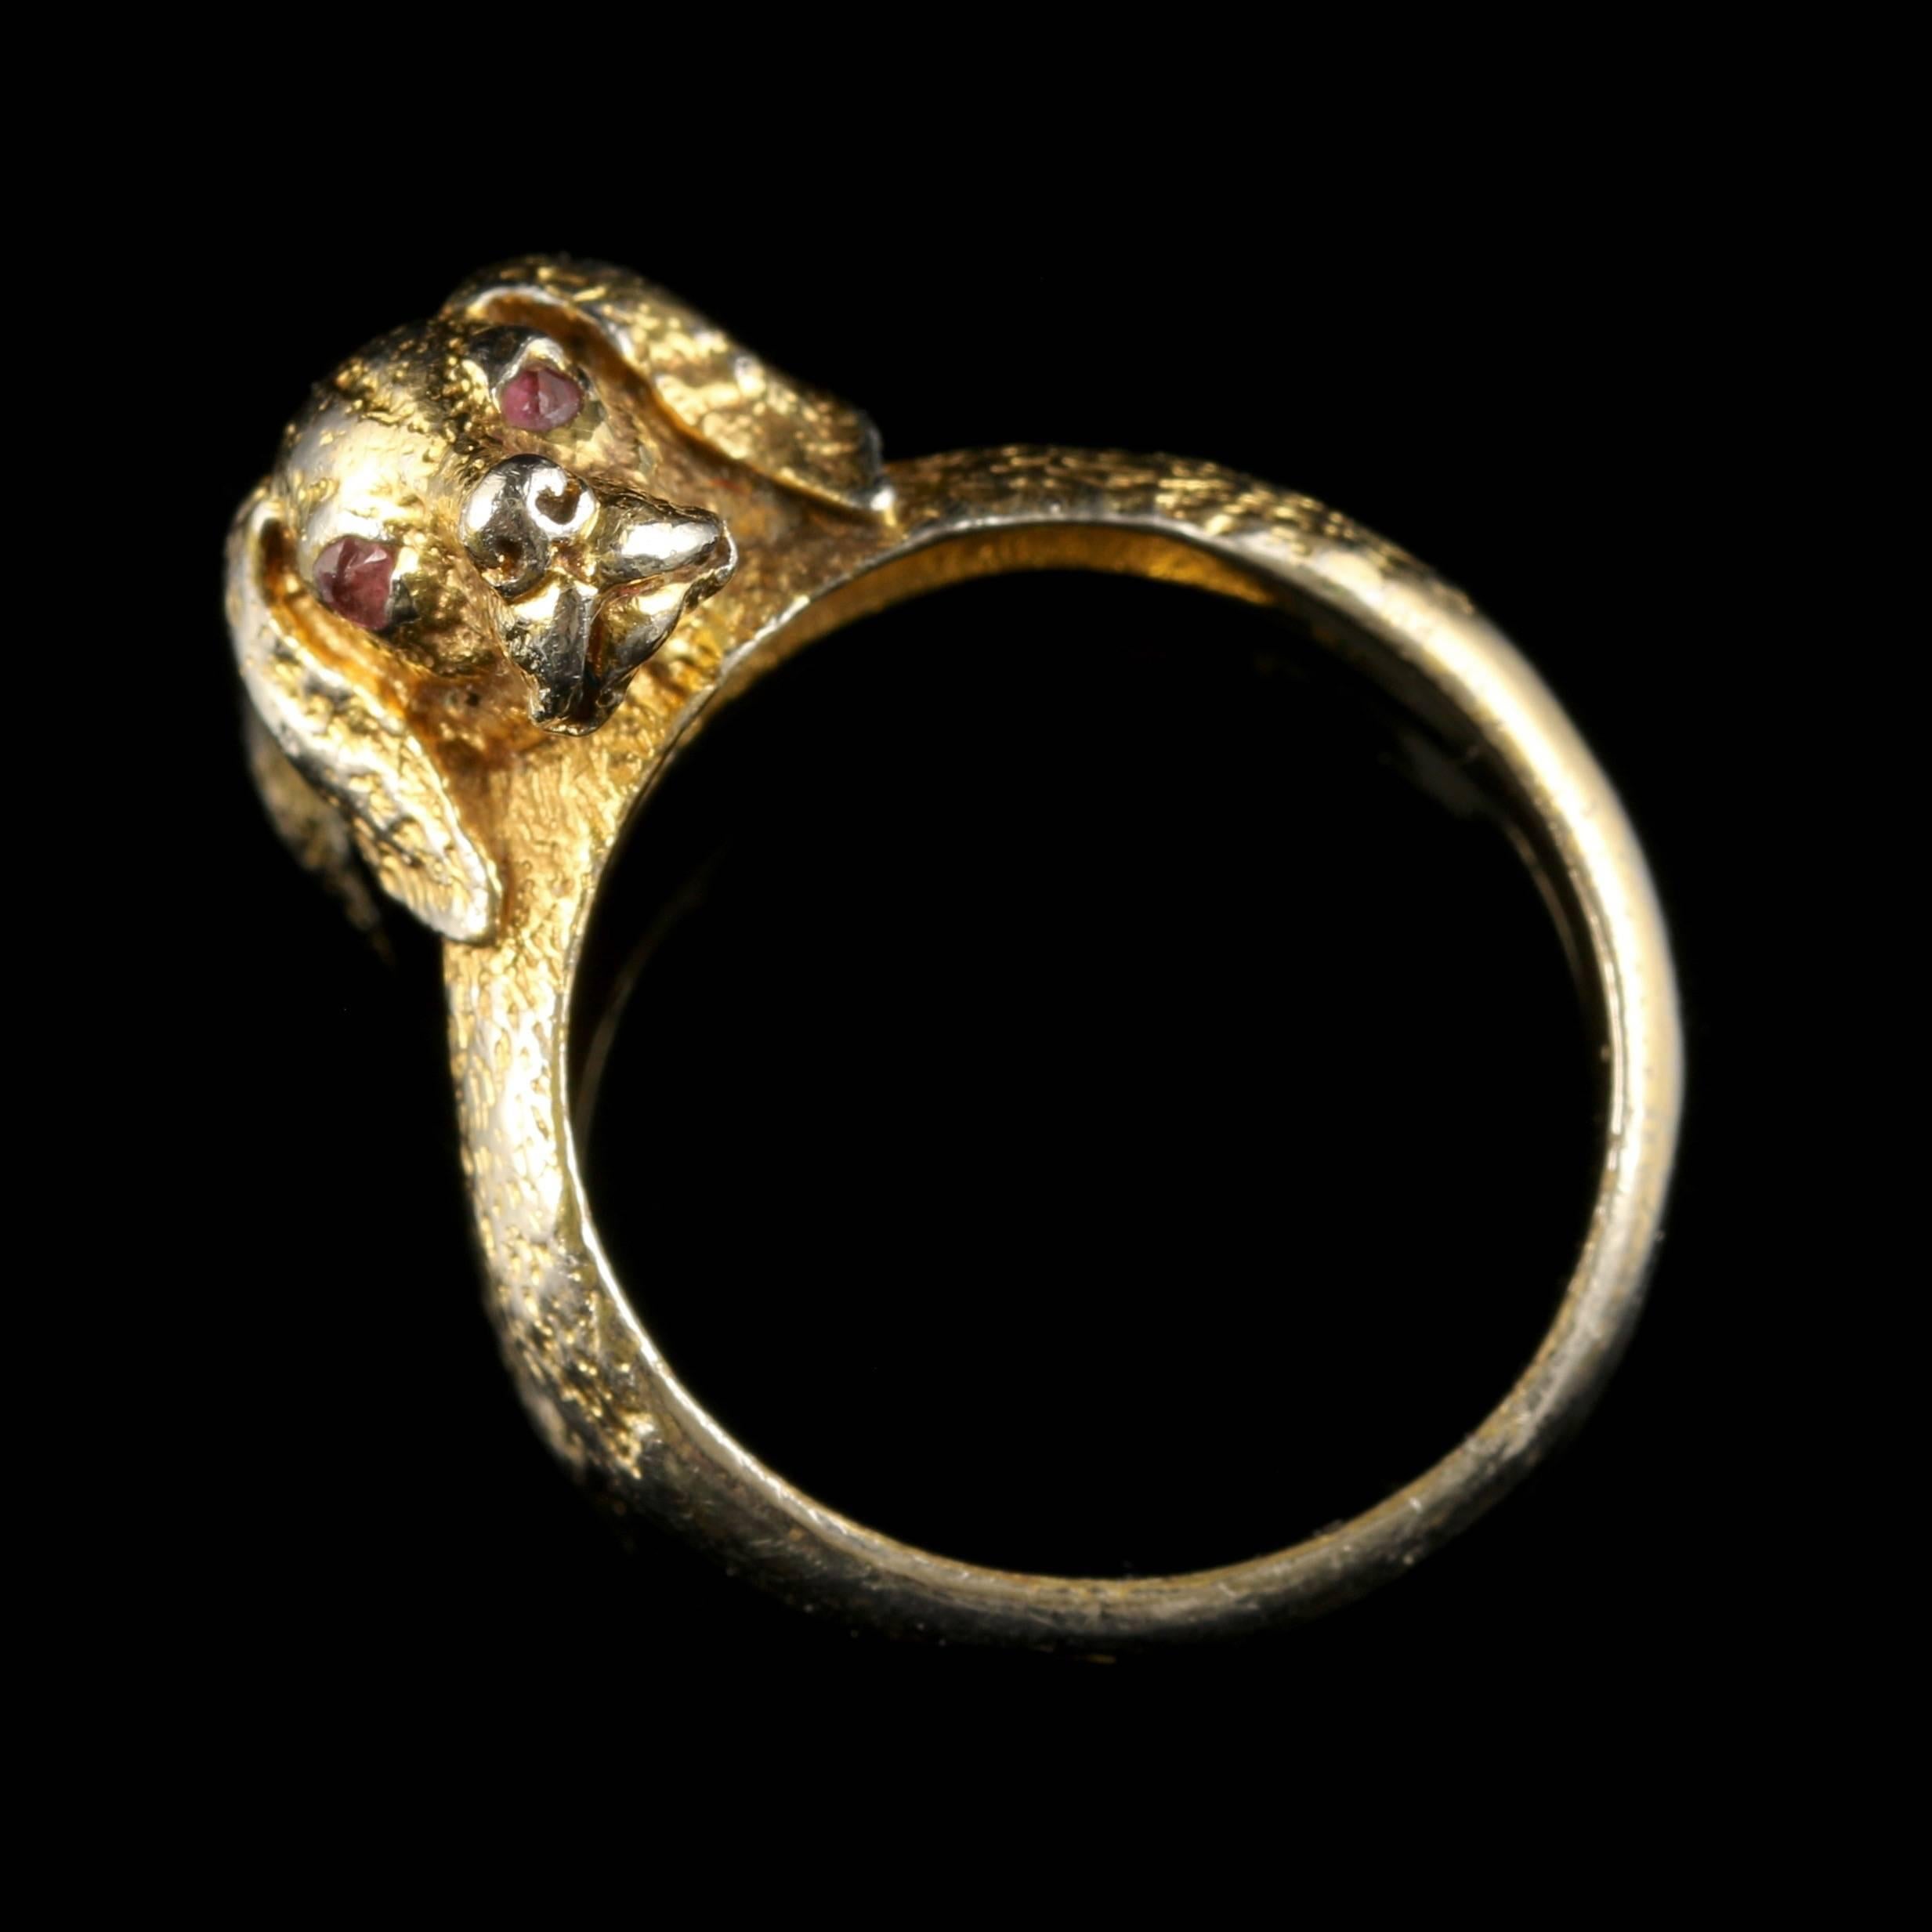 For more details please click continue reading down below...

This wonderful French ring is set with a little handsome Gun Dogs face, all set in Silver Gilt. Circa 1880

The dogs eyes are set with Garnet stones.

The Garnet is a stone of purity and